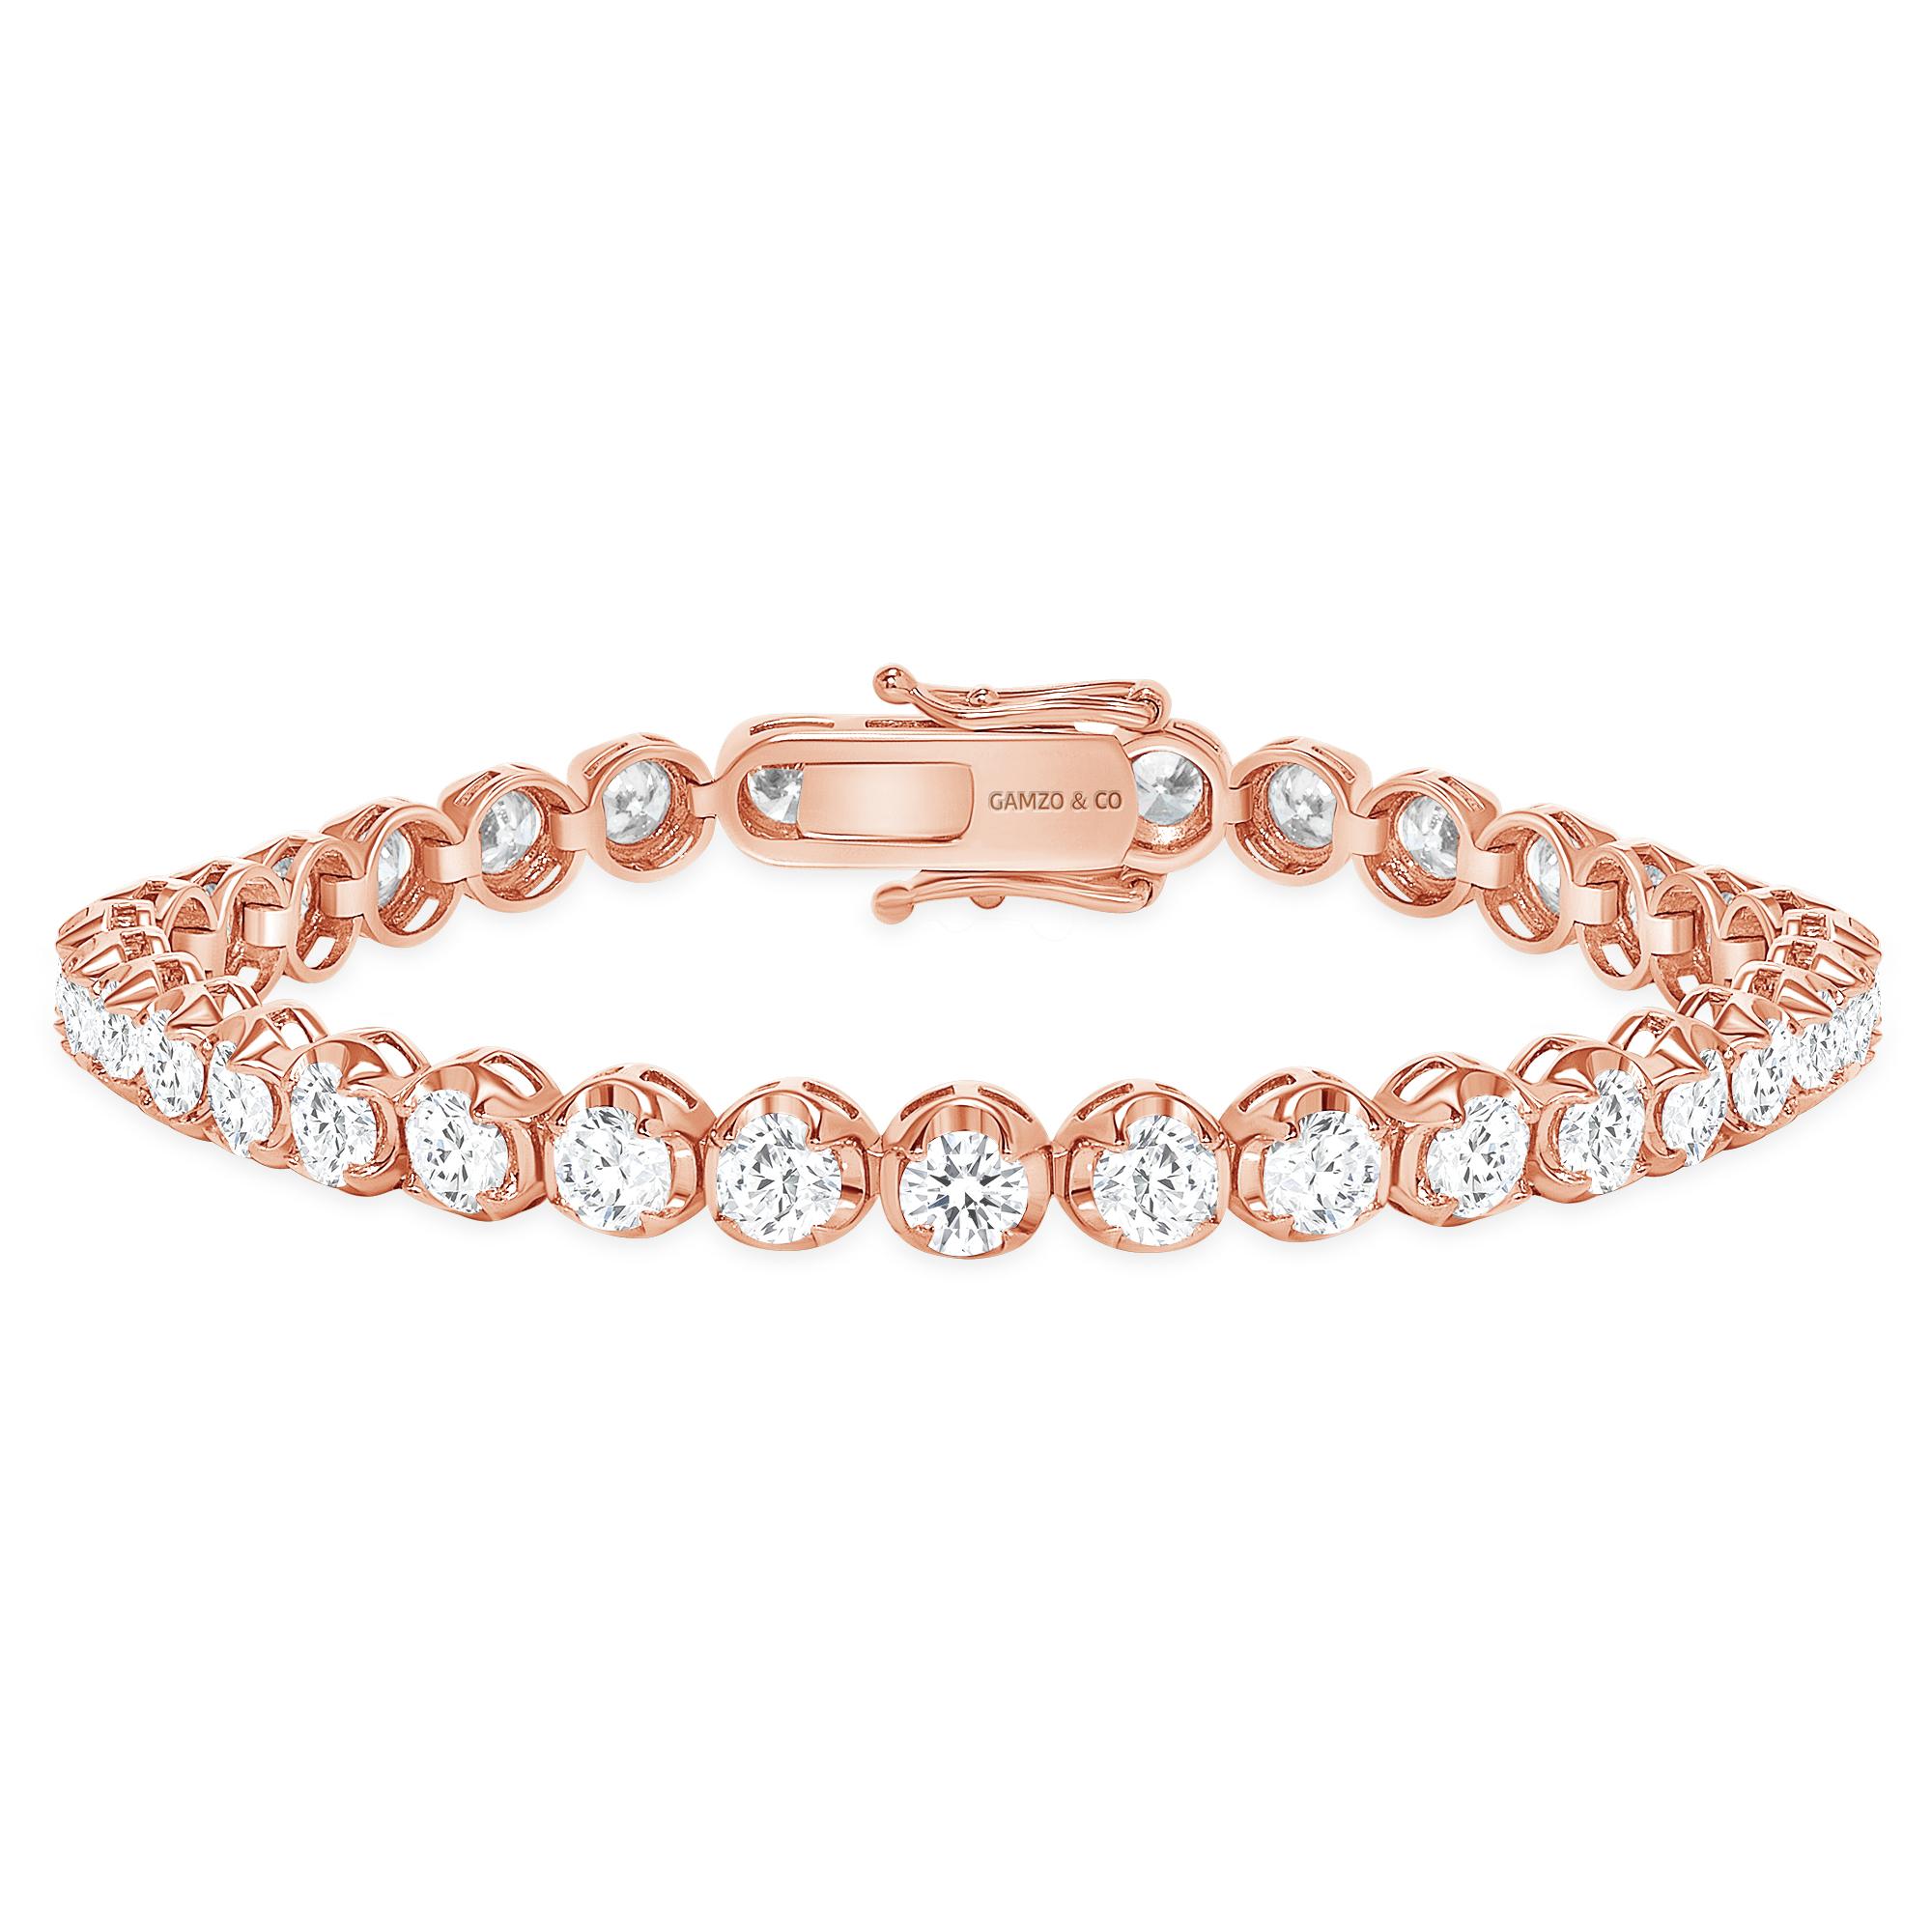 These beautiful round diamonds dance around your wrist as they absorb light and attention.
Metal: 14k Gold
Diamond Cut: Round
Diamond Total Carats: 5ct
Diamond Clarity: VS
Diamond Color: F
Color: Rose Gold
Bracelet Length: 8.5 Inches 
Included with